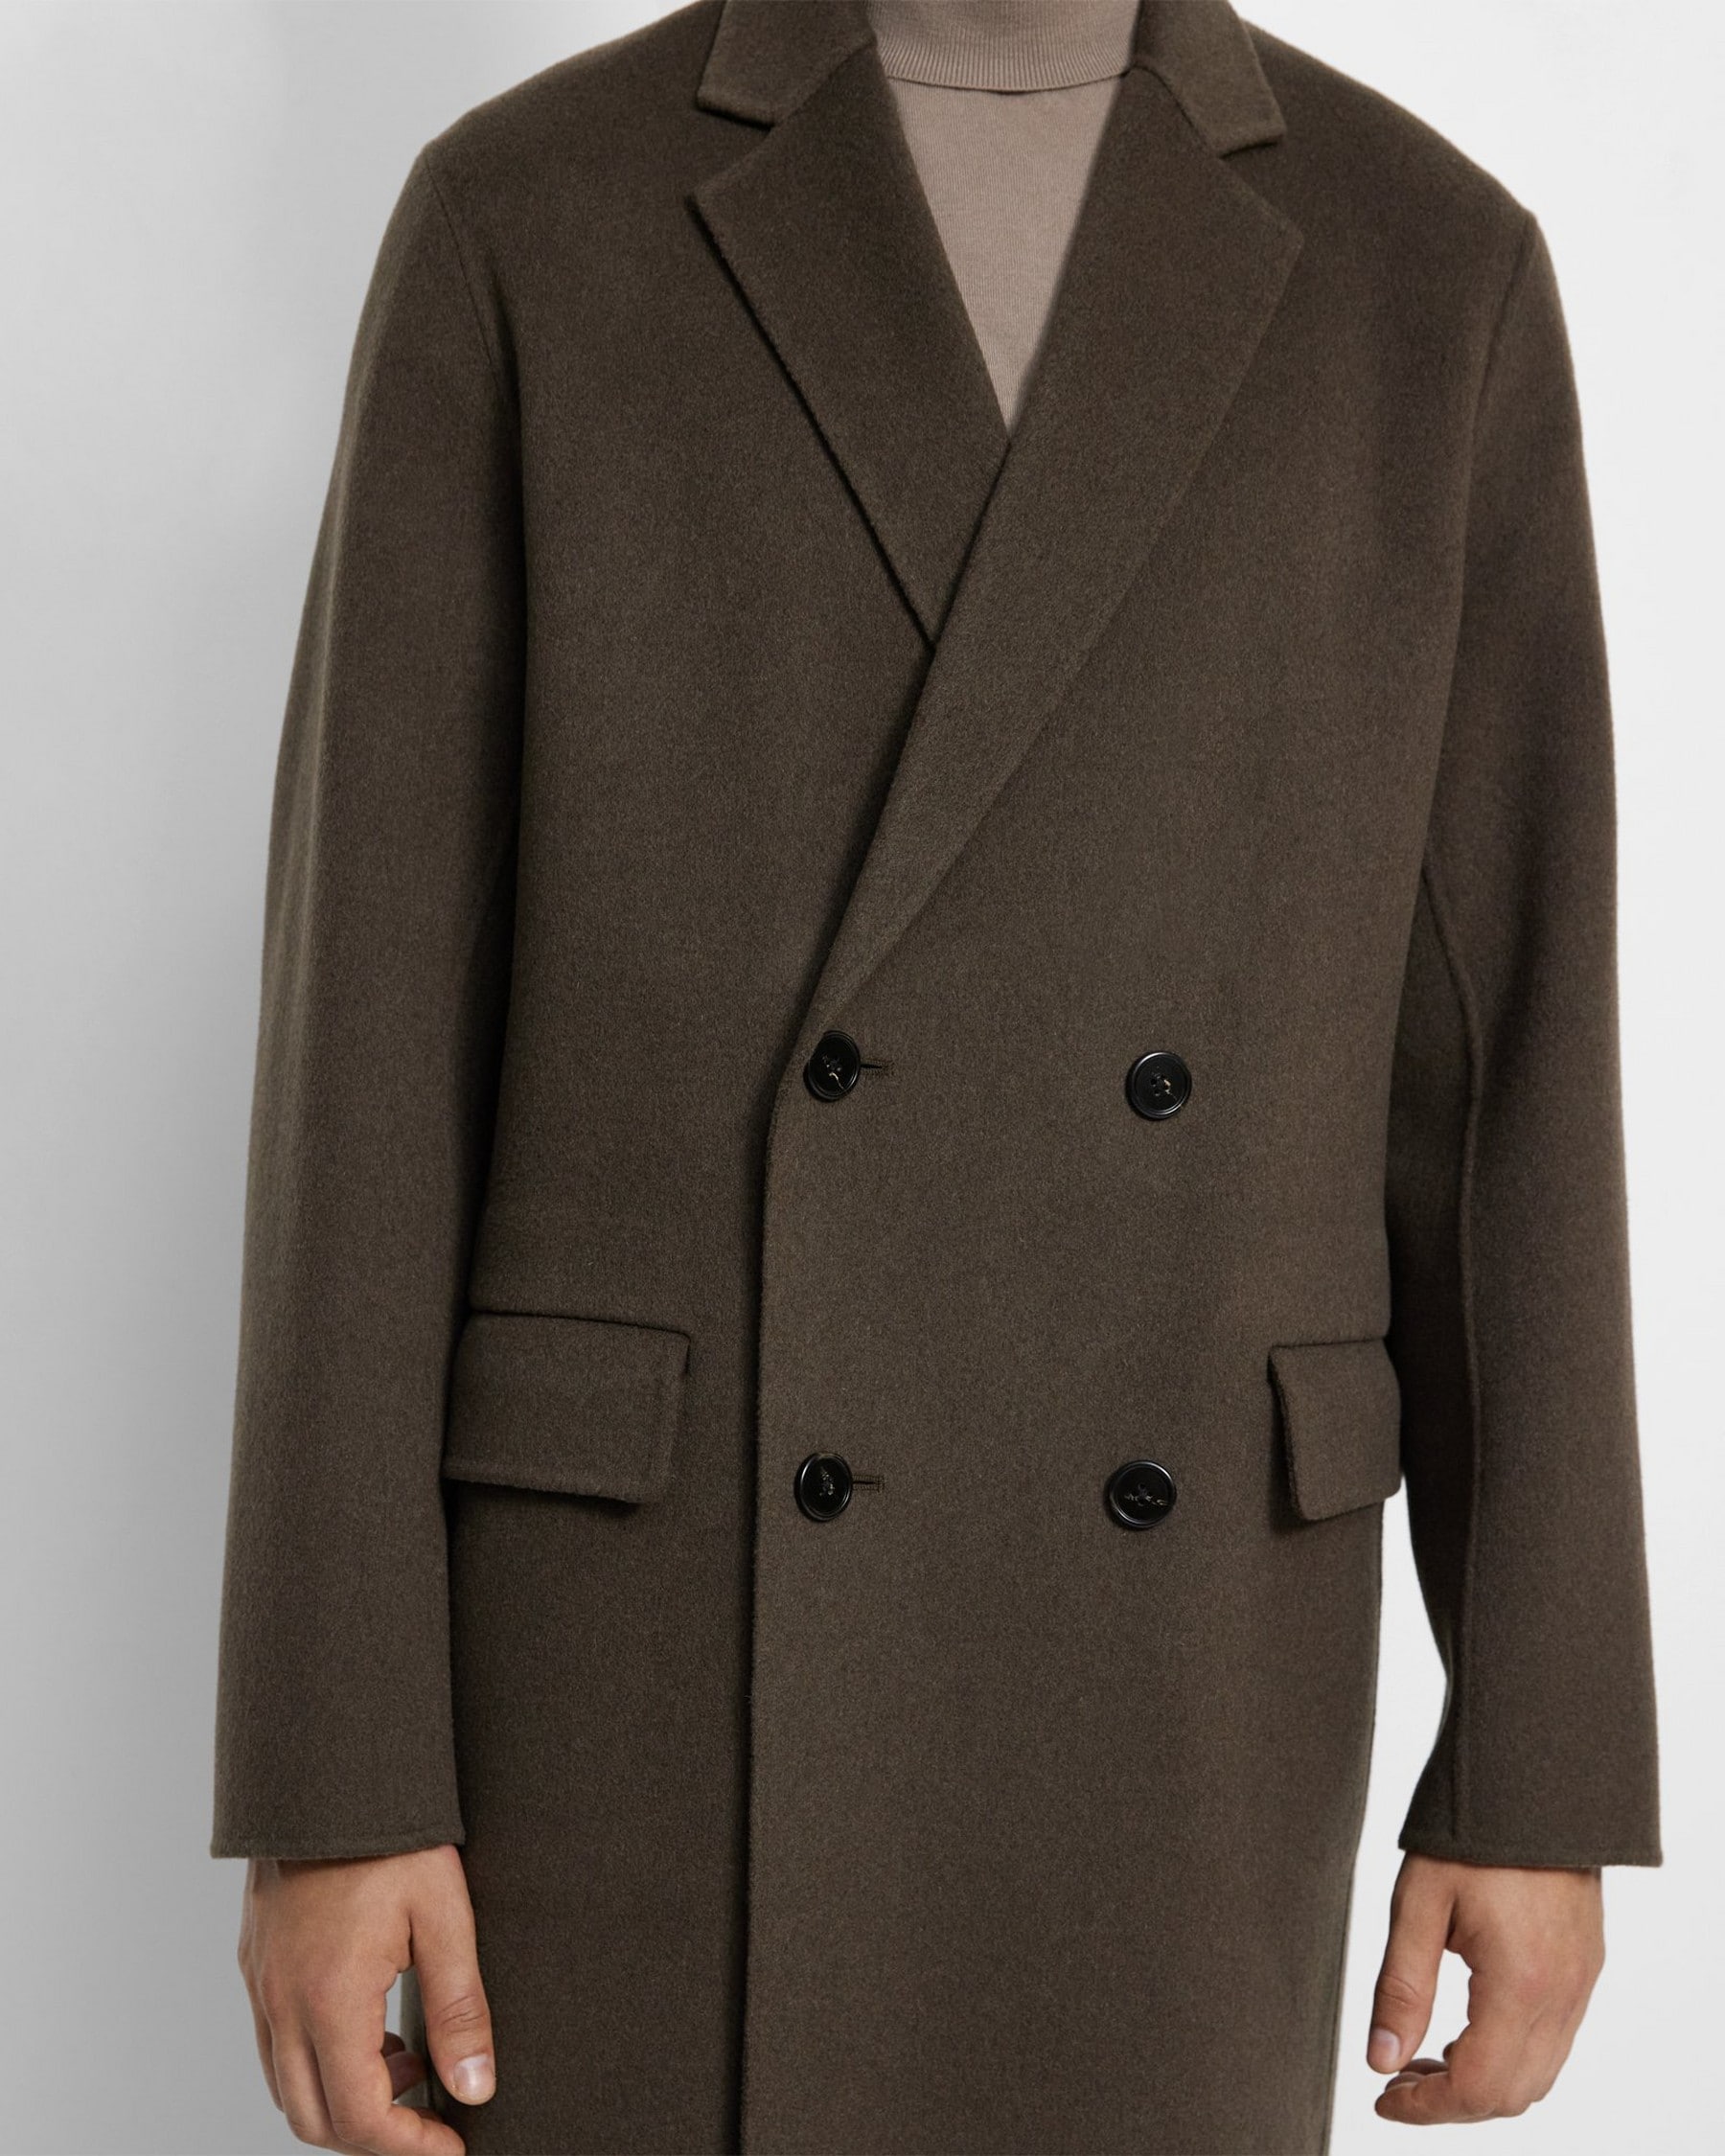 Suffolk Coat in Double-Face Wool-Cashmere